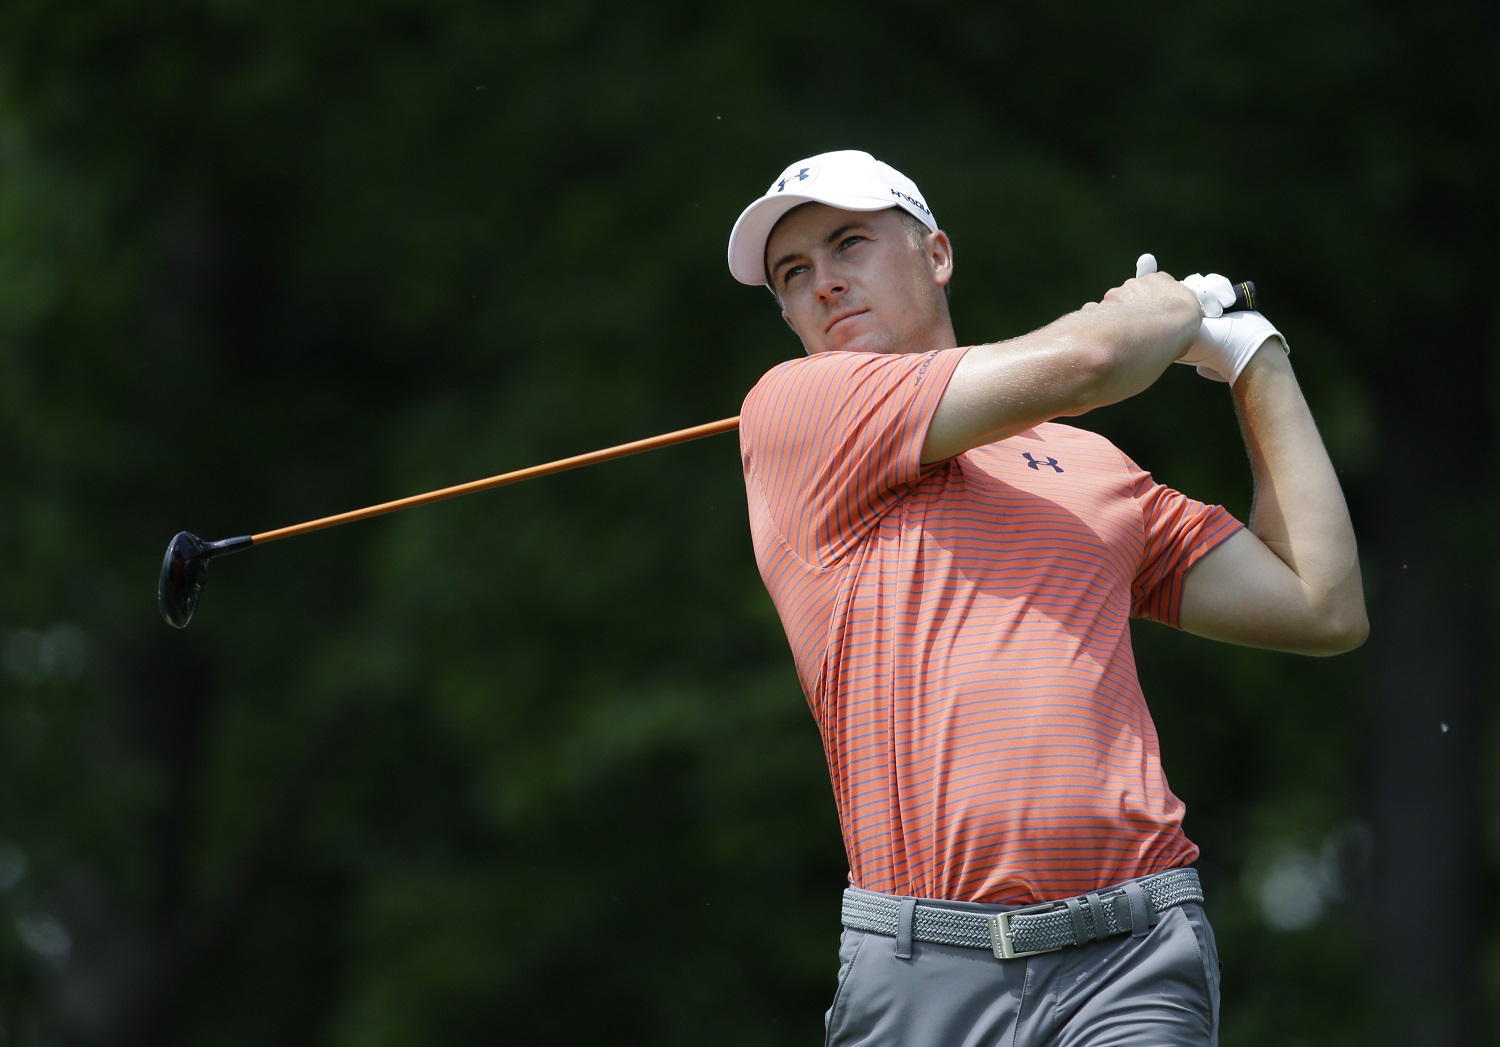 Jordan Spieth watches his tee shot on the ninth hole during the second round of the Memorial golf tournament, Friday, June 3, 2016, in Dublin, Ohio. (AP Photo/Darron Cummings)